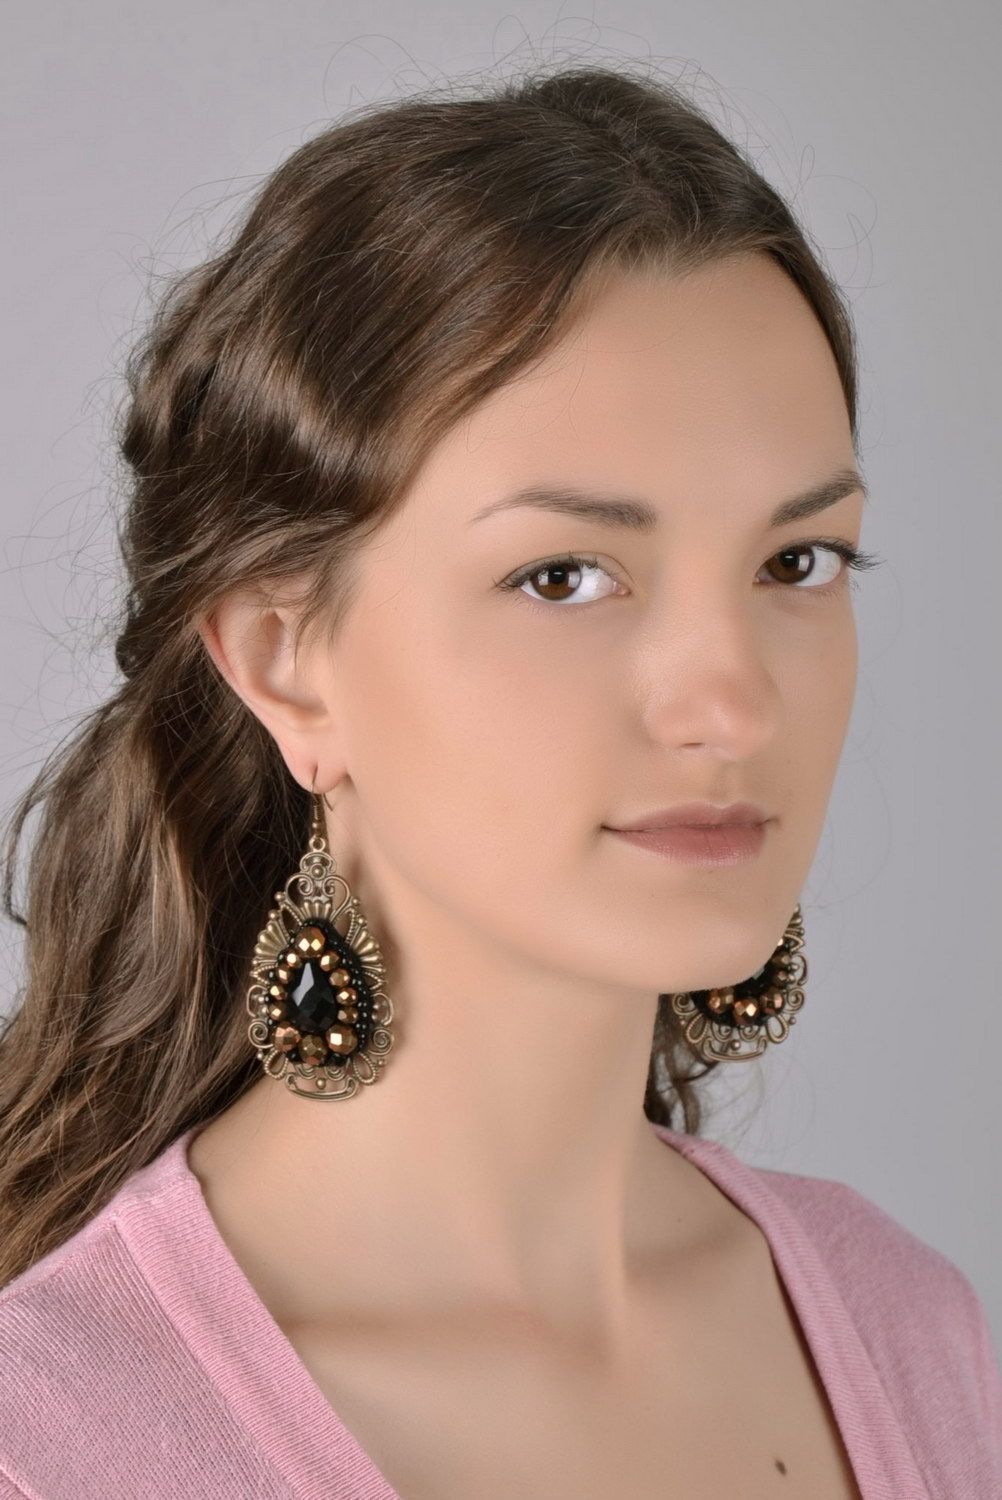 Earrings made of Czech crystals photo 1